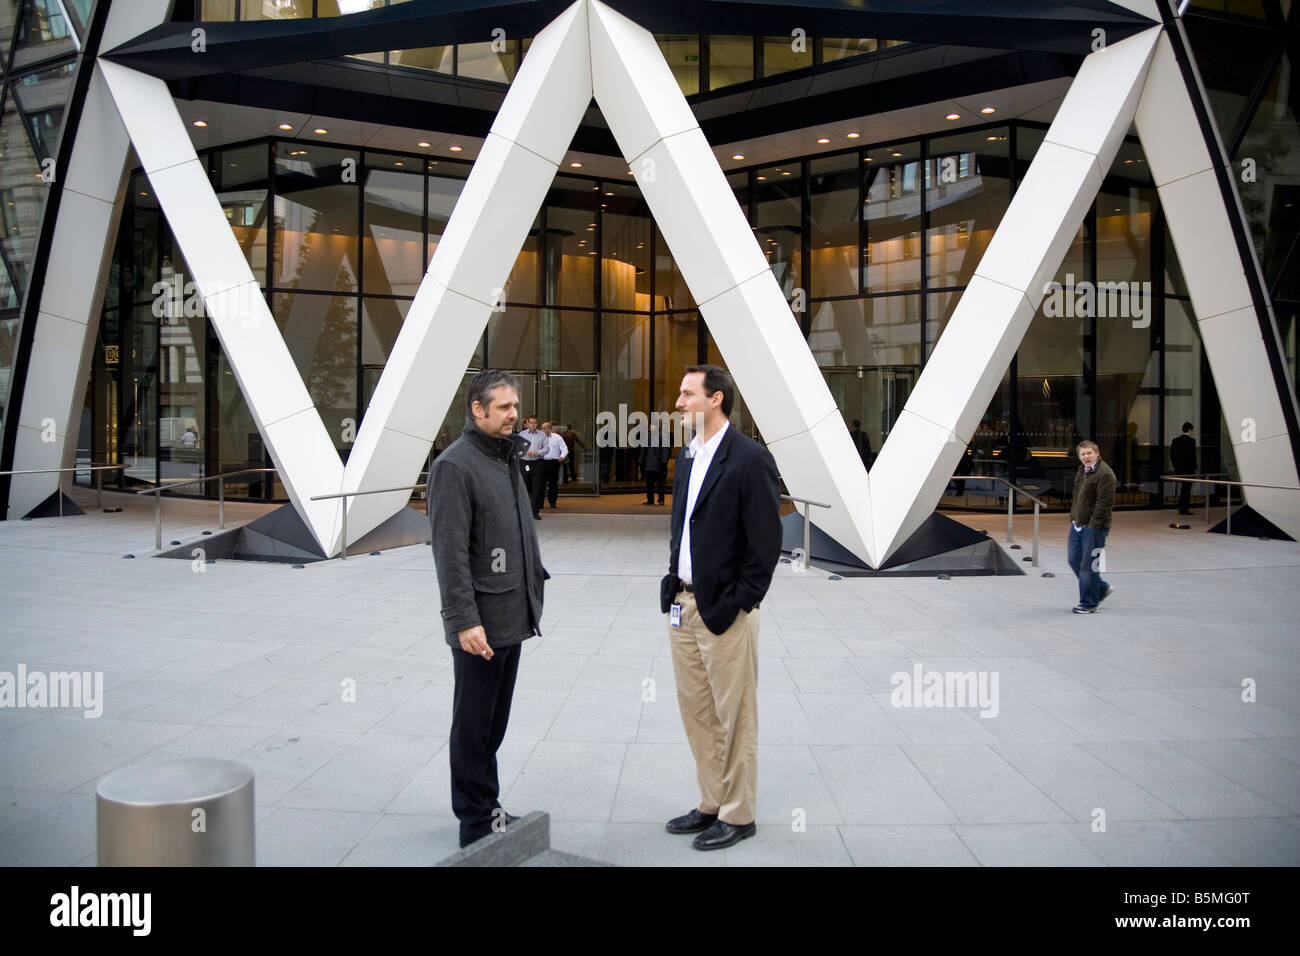 Two man at the entrance of the 'Swiss re' tower in the City of London England UK Stock Photo